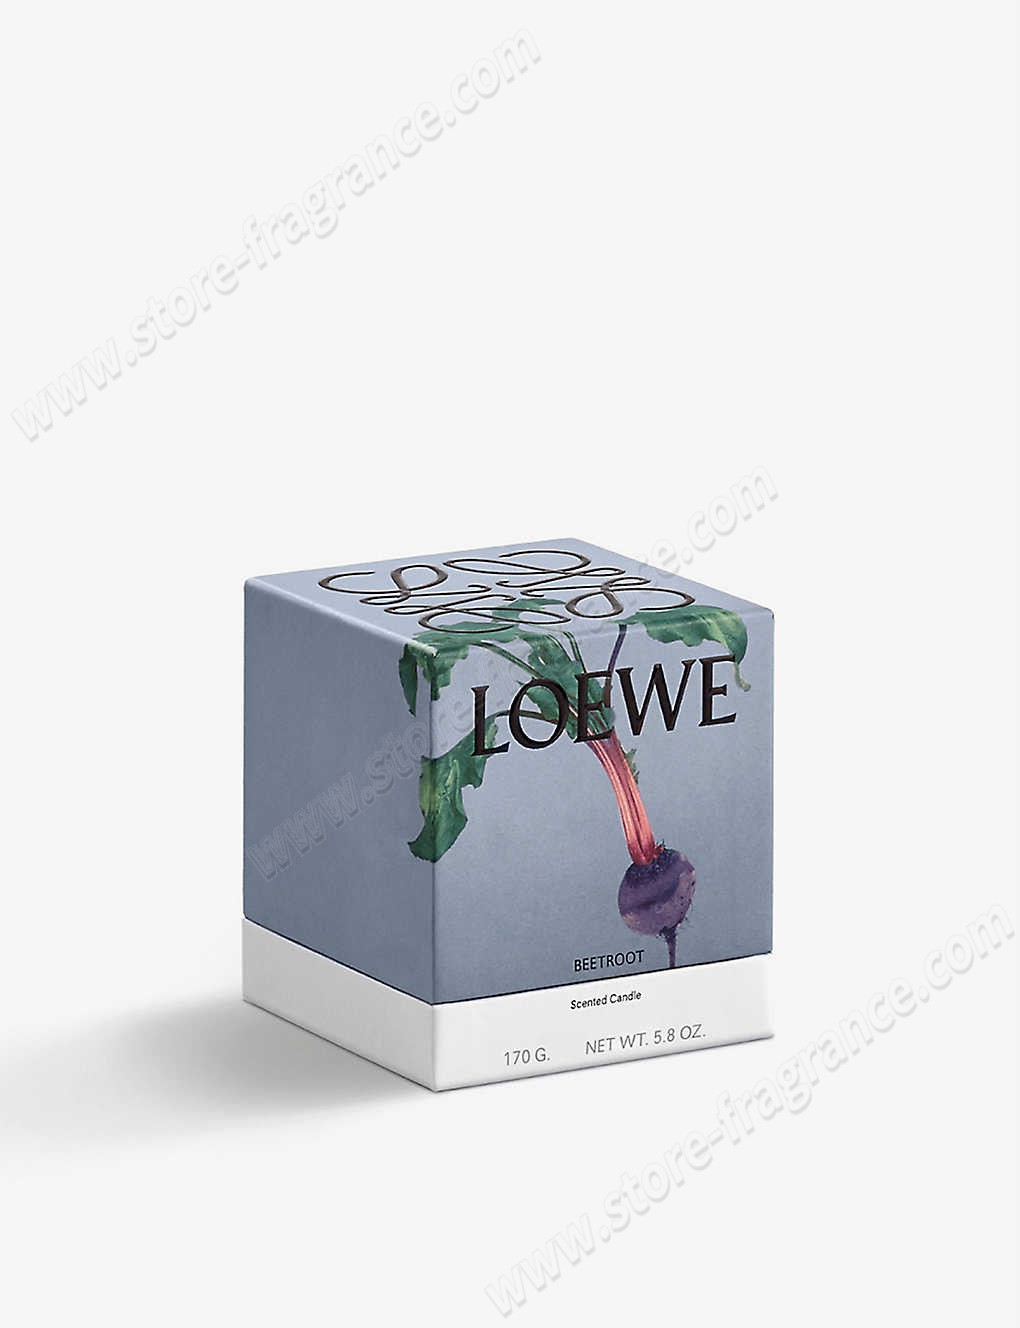 LOEWE/Beetroot small scented candle 170g ✿ Discount Store - -1